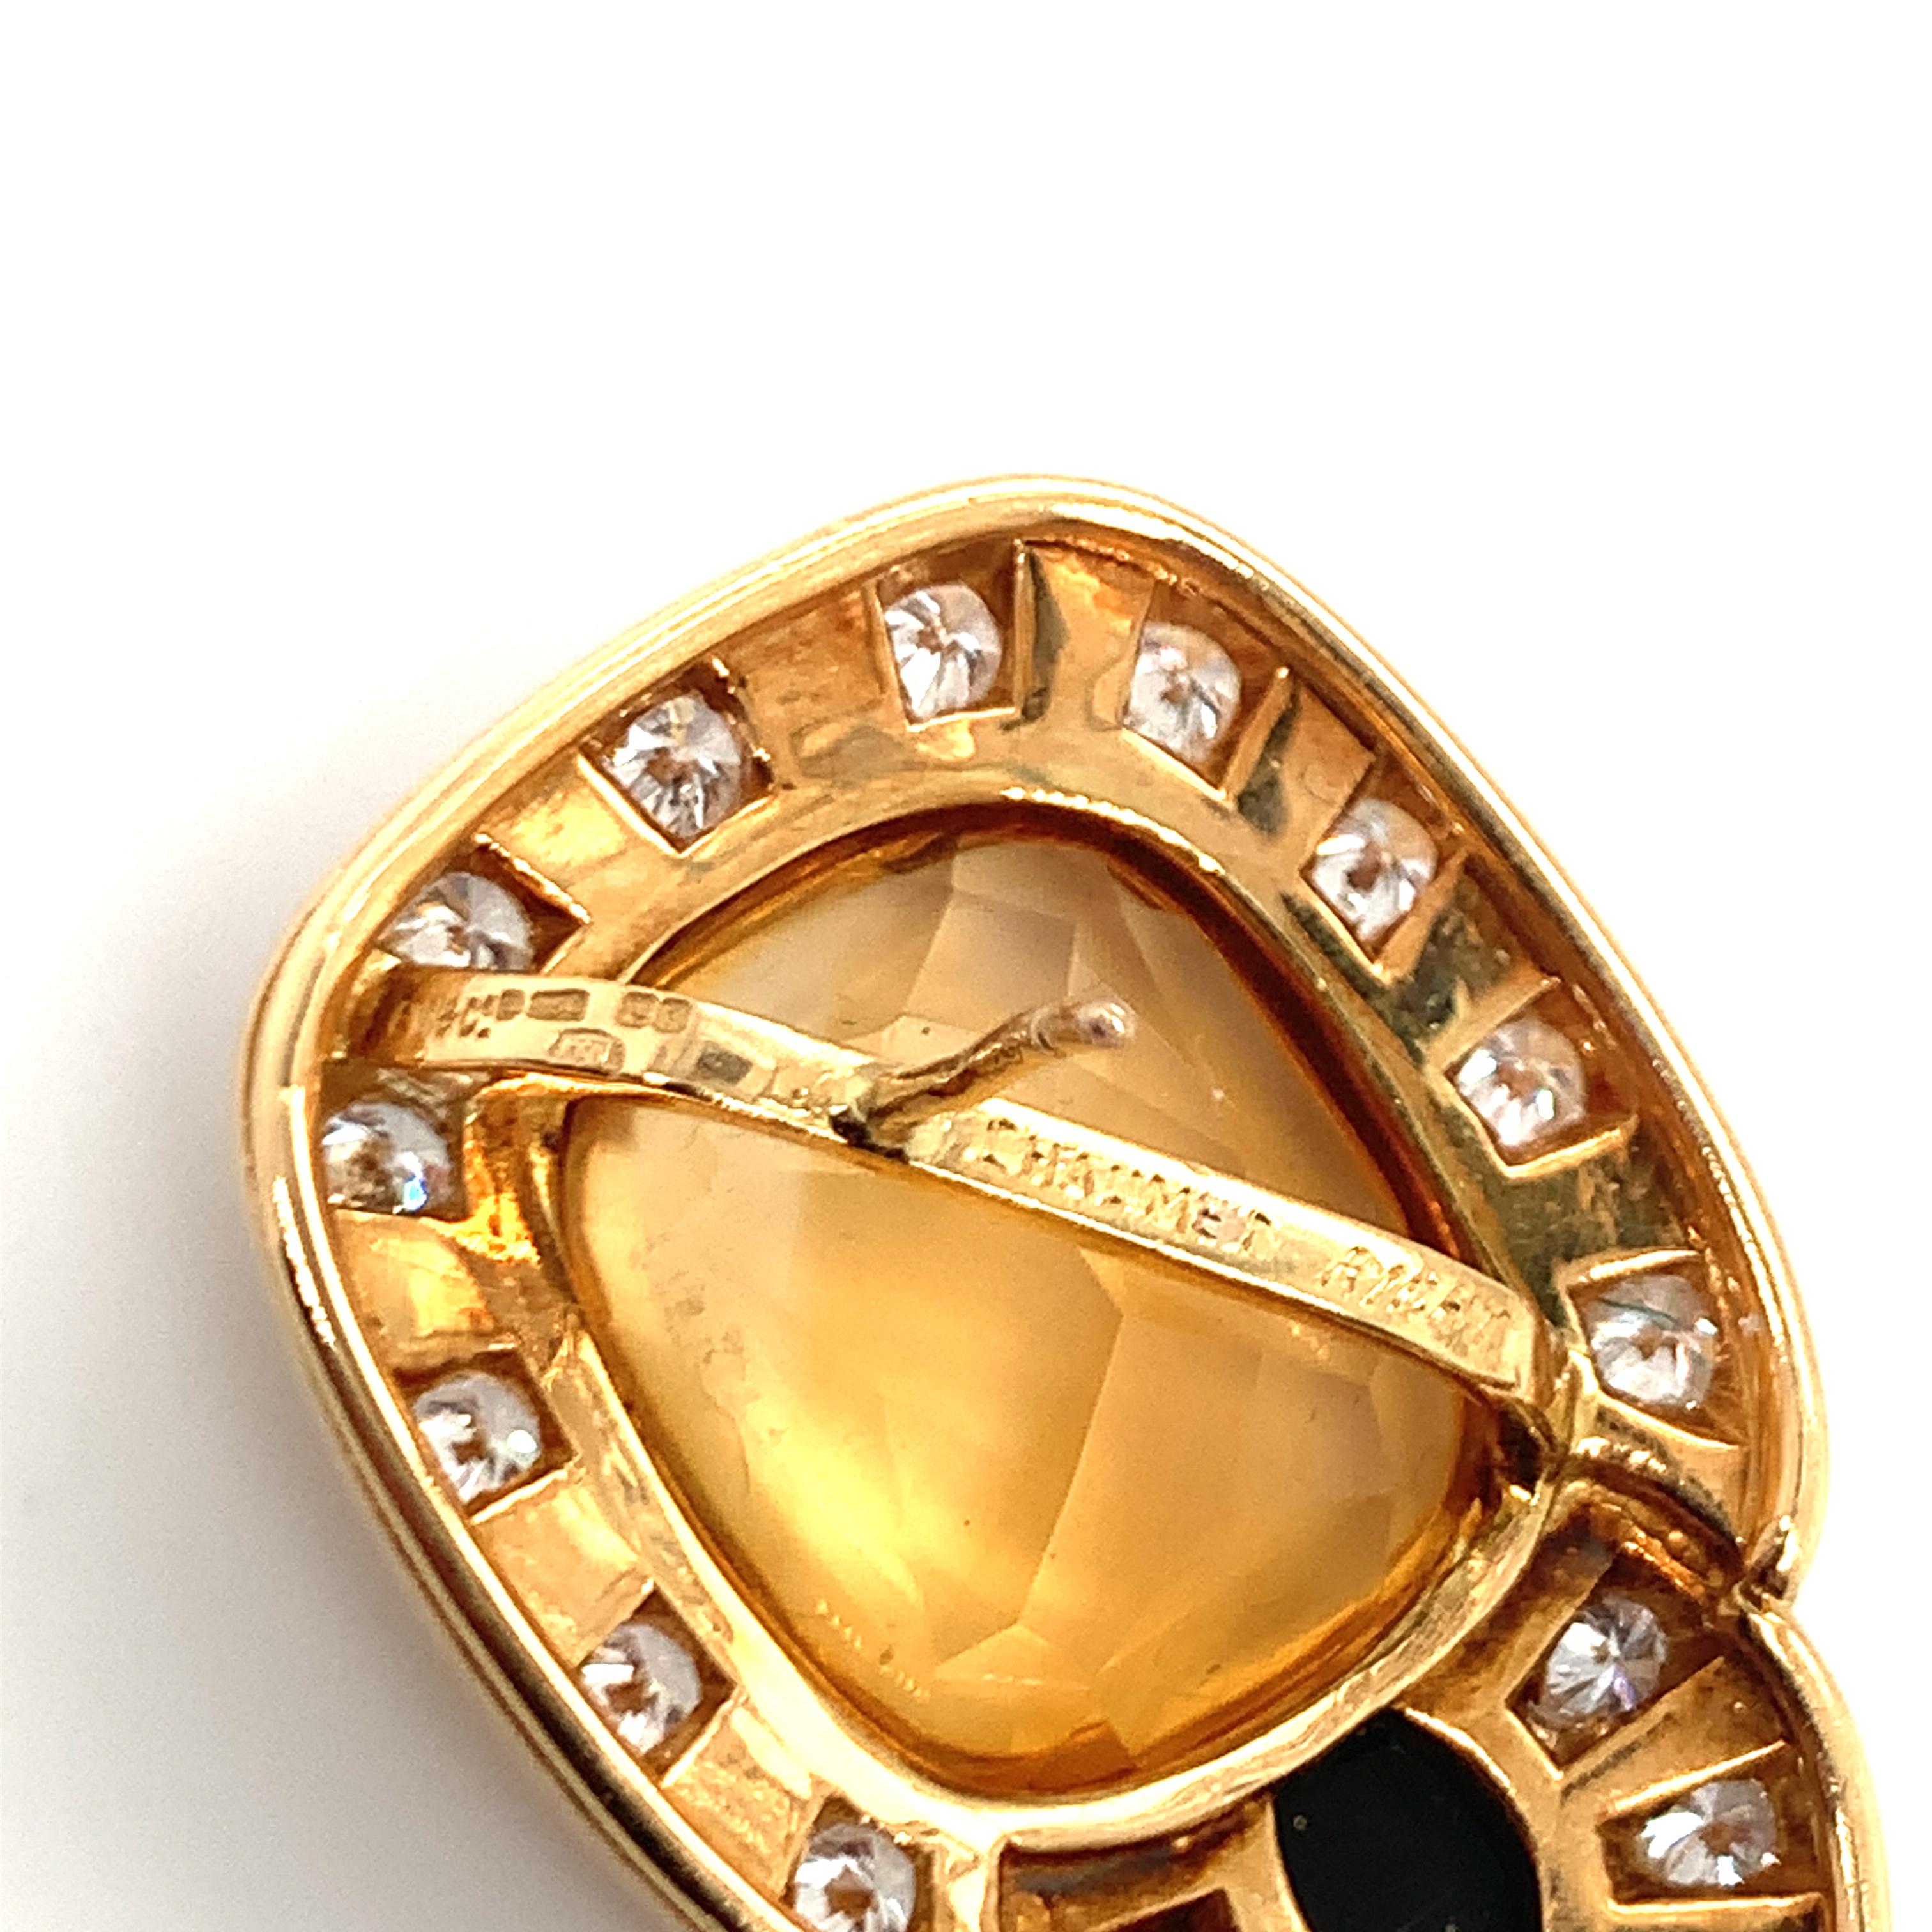 Citrine, black Onyx and diamond 18K yellow gold earrings by Chaumet featuring two cushion cabochon cut citrines totaling 25 ct. with a black onyx accent below each stone. The earrings are further accented by 36 round brilliant diamonds weighing 2.25